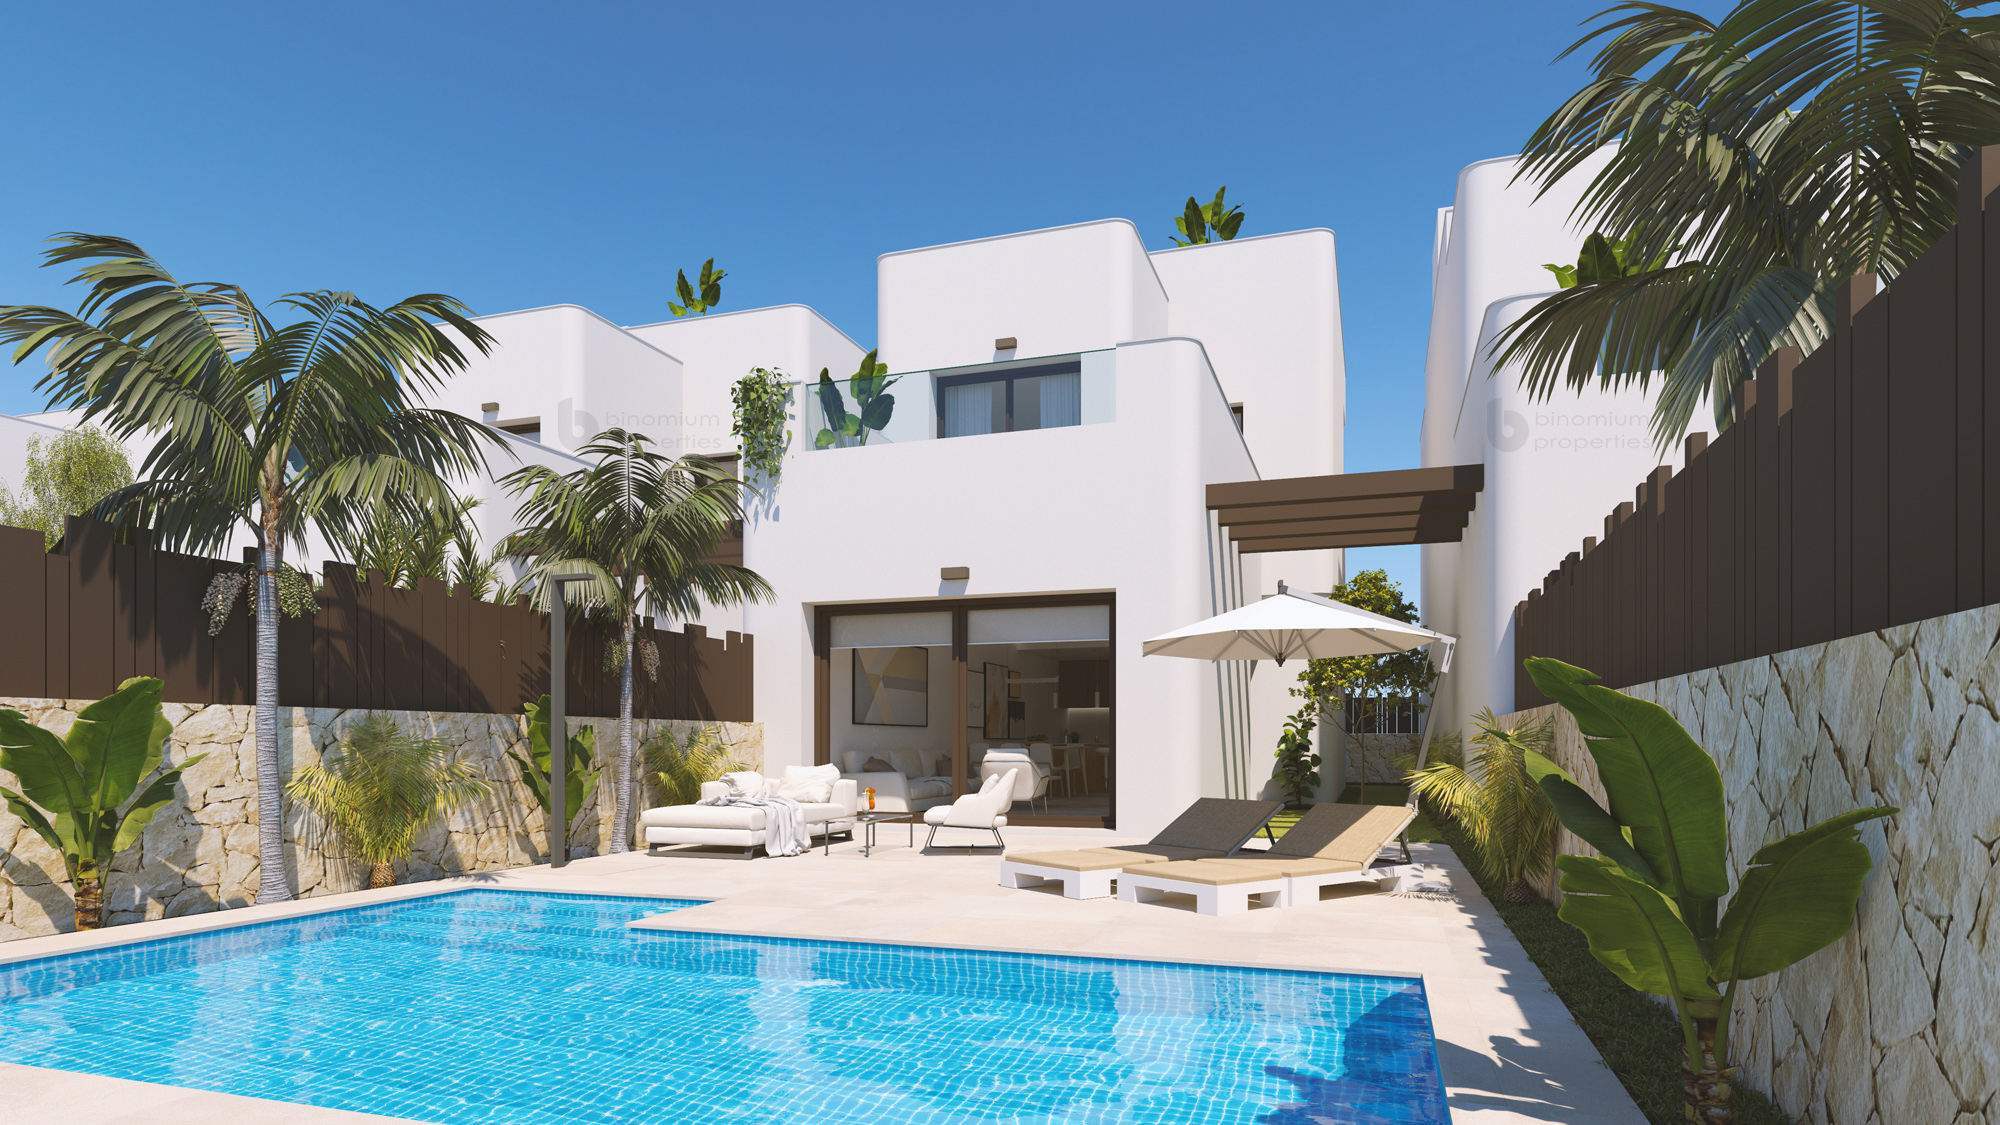 Detached villas in Mil Palmeras 800 meters from the beach